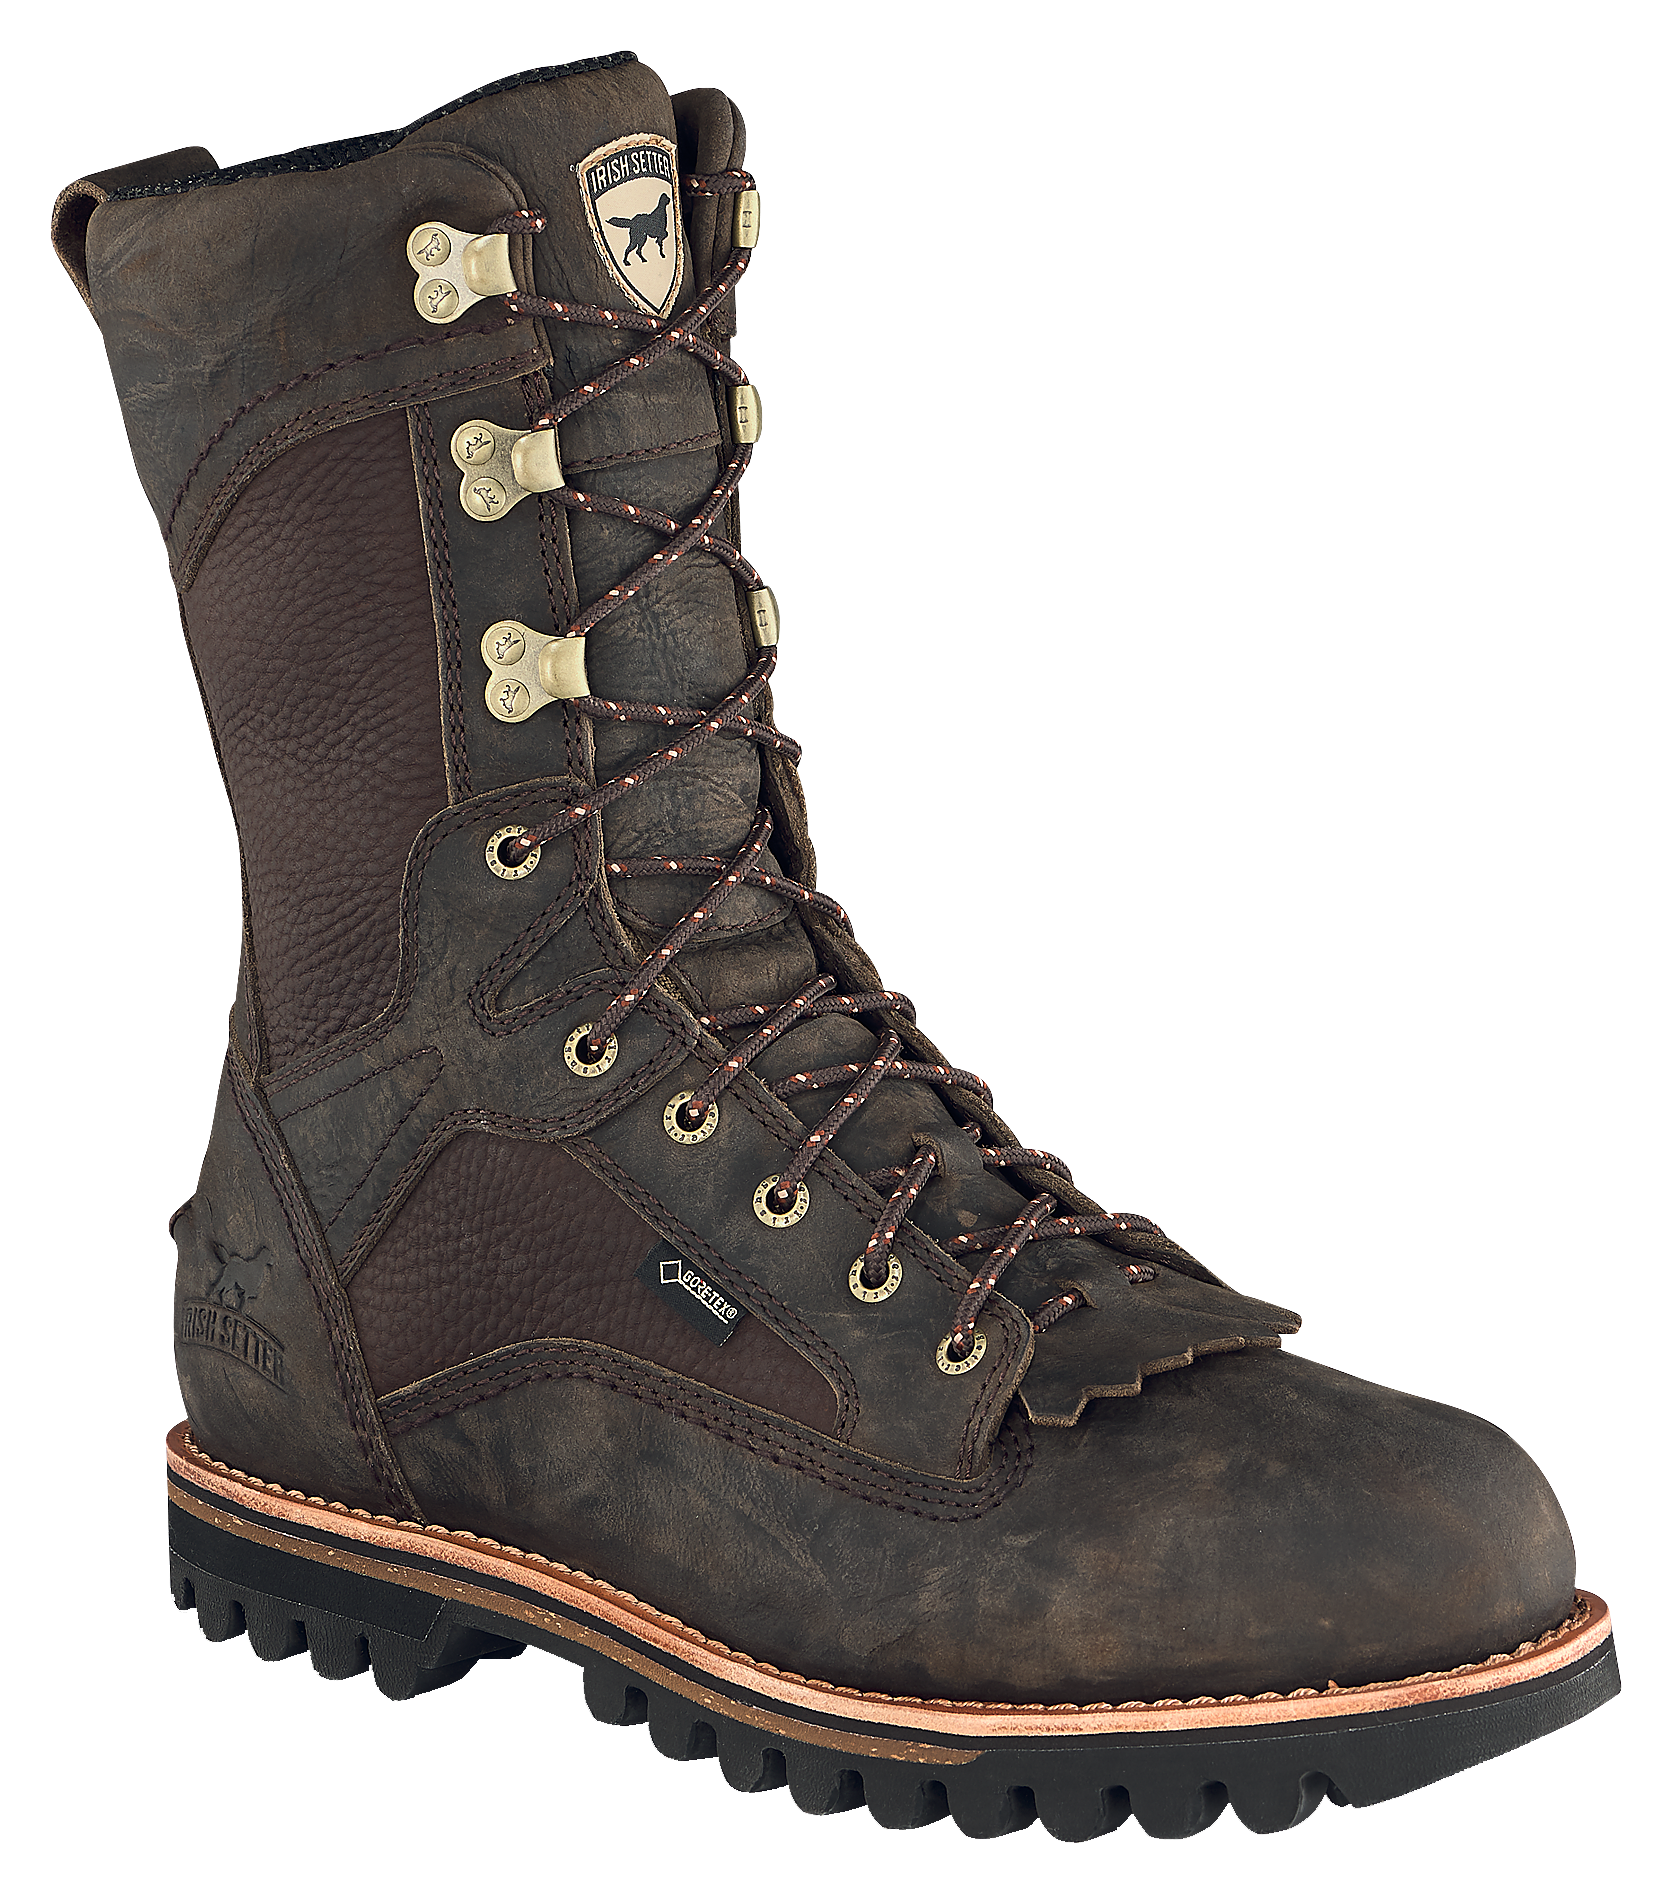 Irish Setter Elk Tracker GORE-TEX Insulated Hunting Boots for Men - Brown - 8M